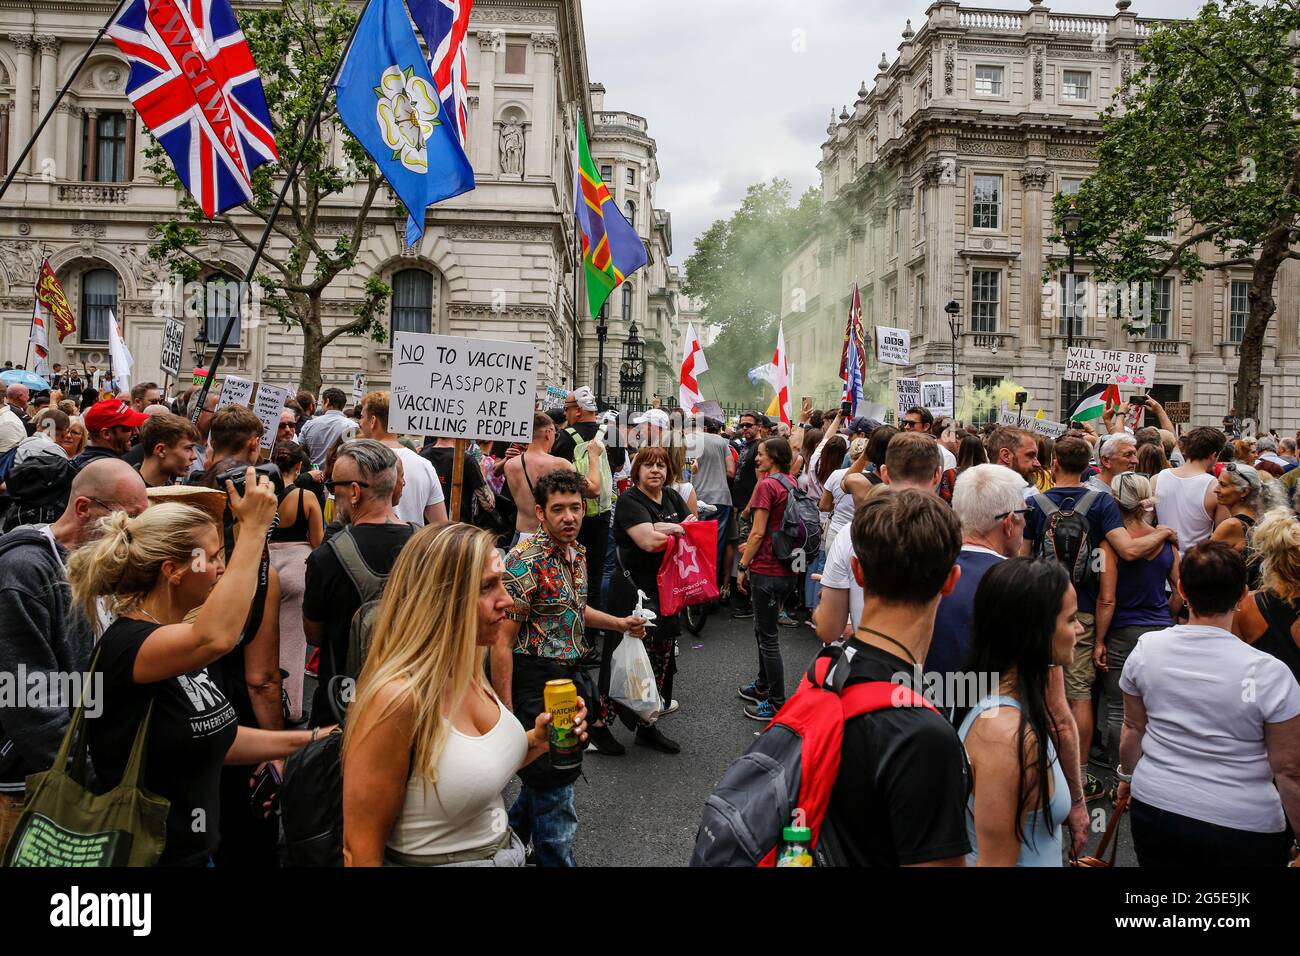 London, UK on June 26, 2021: Protesters holding placards demonstrate in front of Downing Street during Anti-Lockdown demonstration Unite for Freedom. People protesting against the lockdowns came together to raise their concerns regarding government vaccination legislations and freedom to travel and socialize. Stock Photo